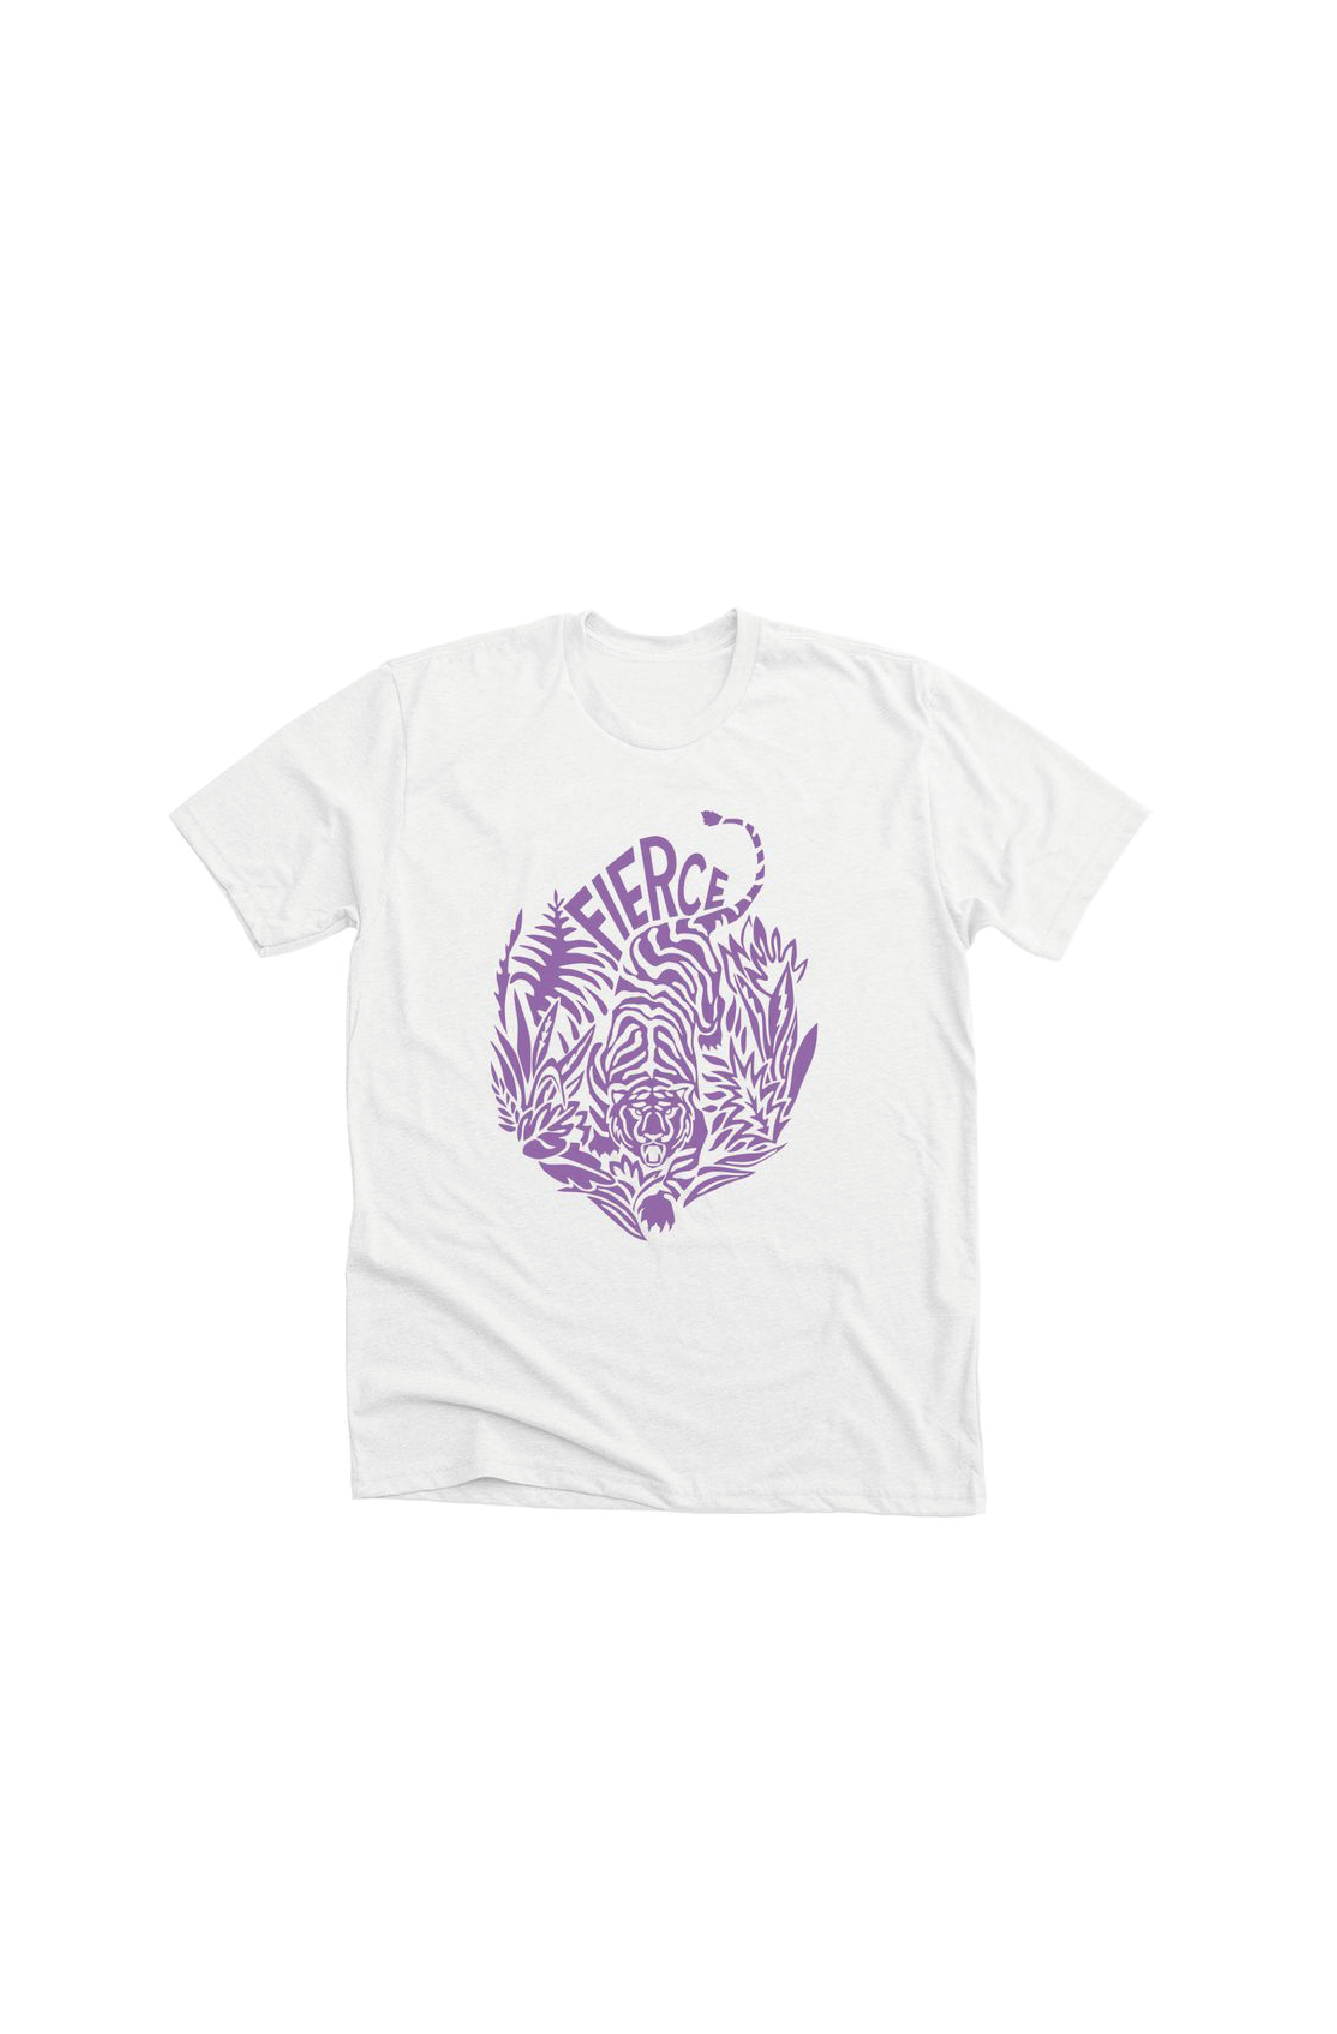 White unisex 100% cotton tshirt with illustration of a tiger in color purple